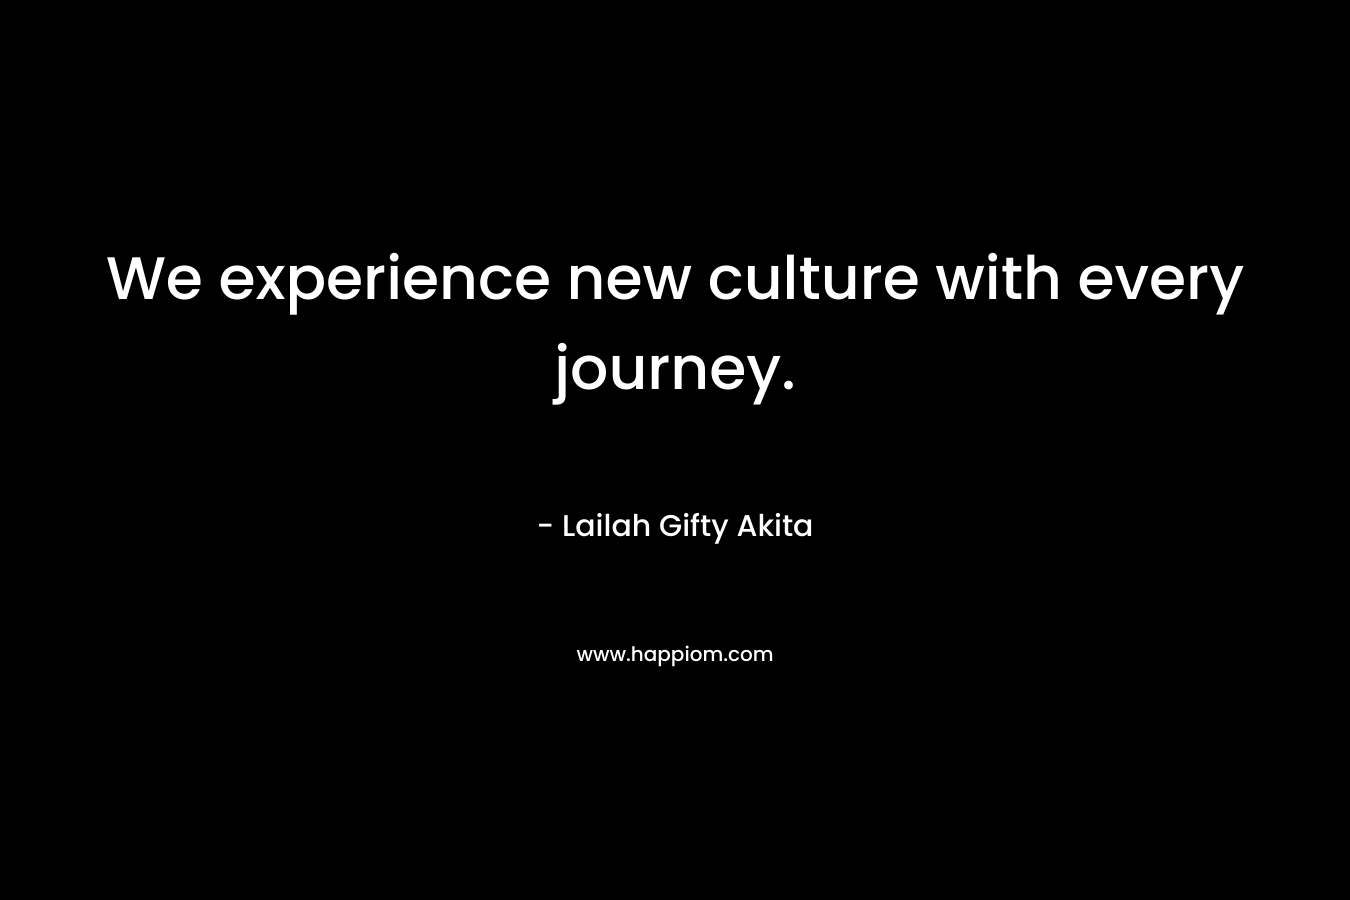 We experience new culture with every journey.